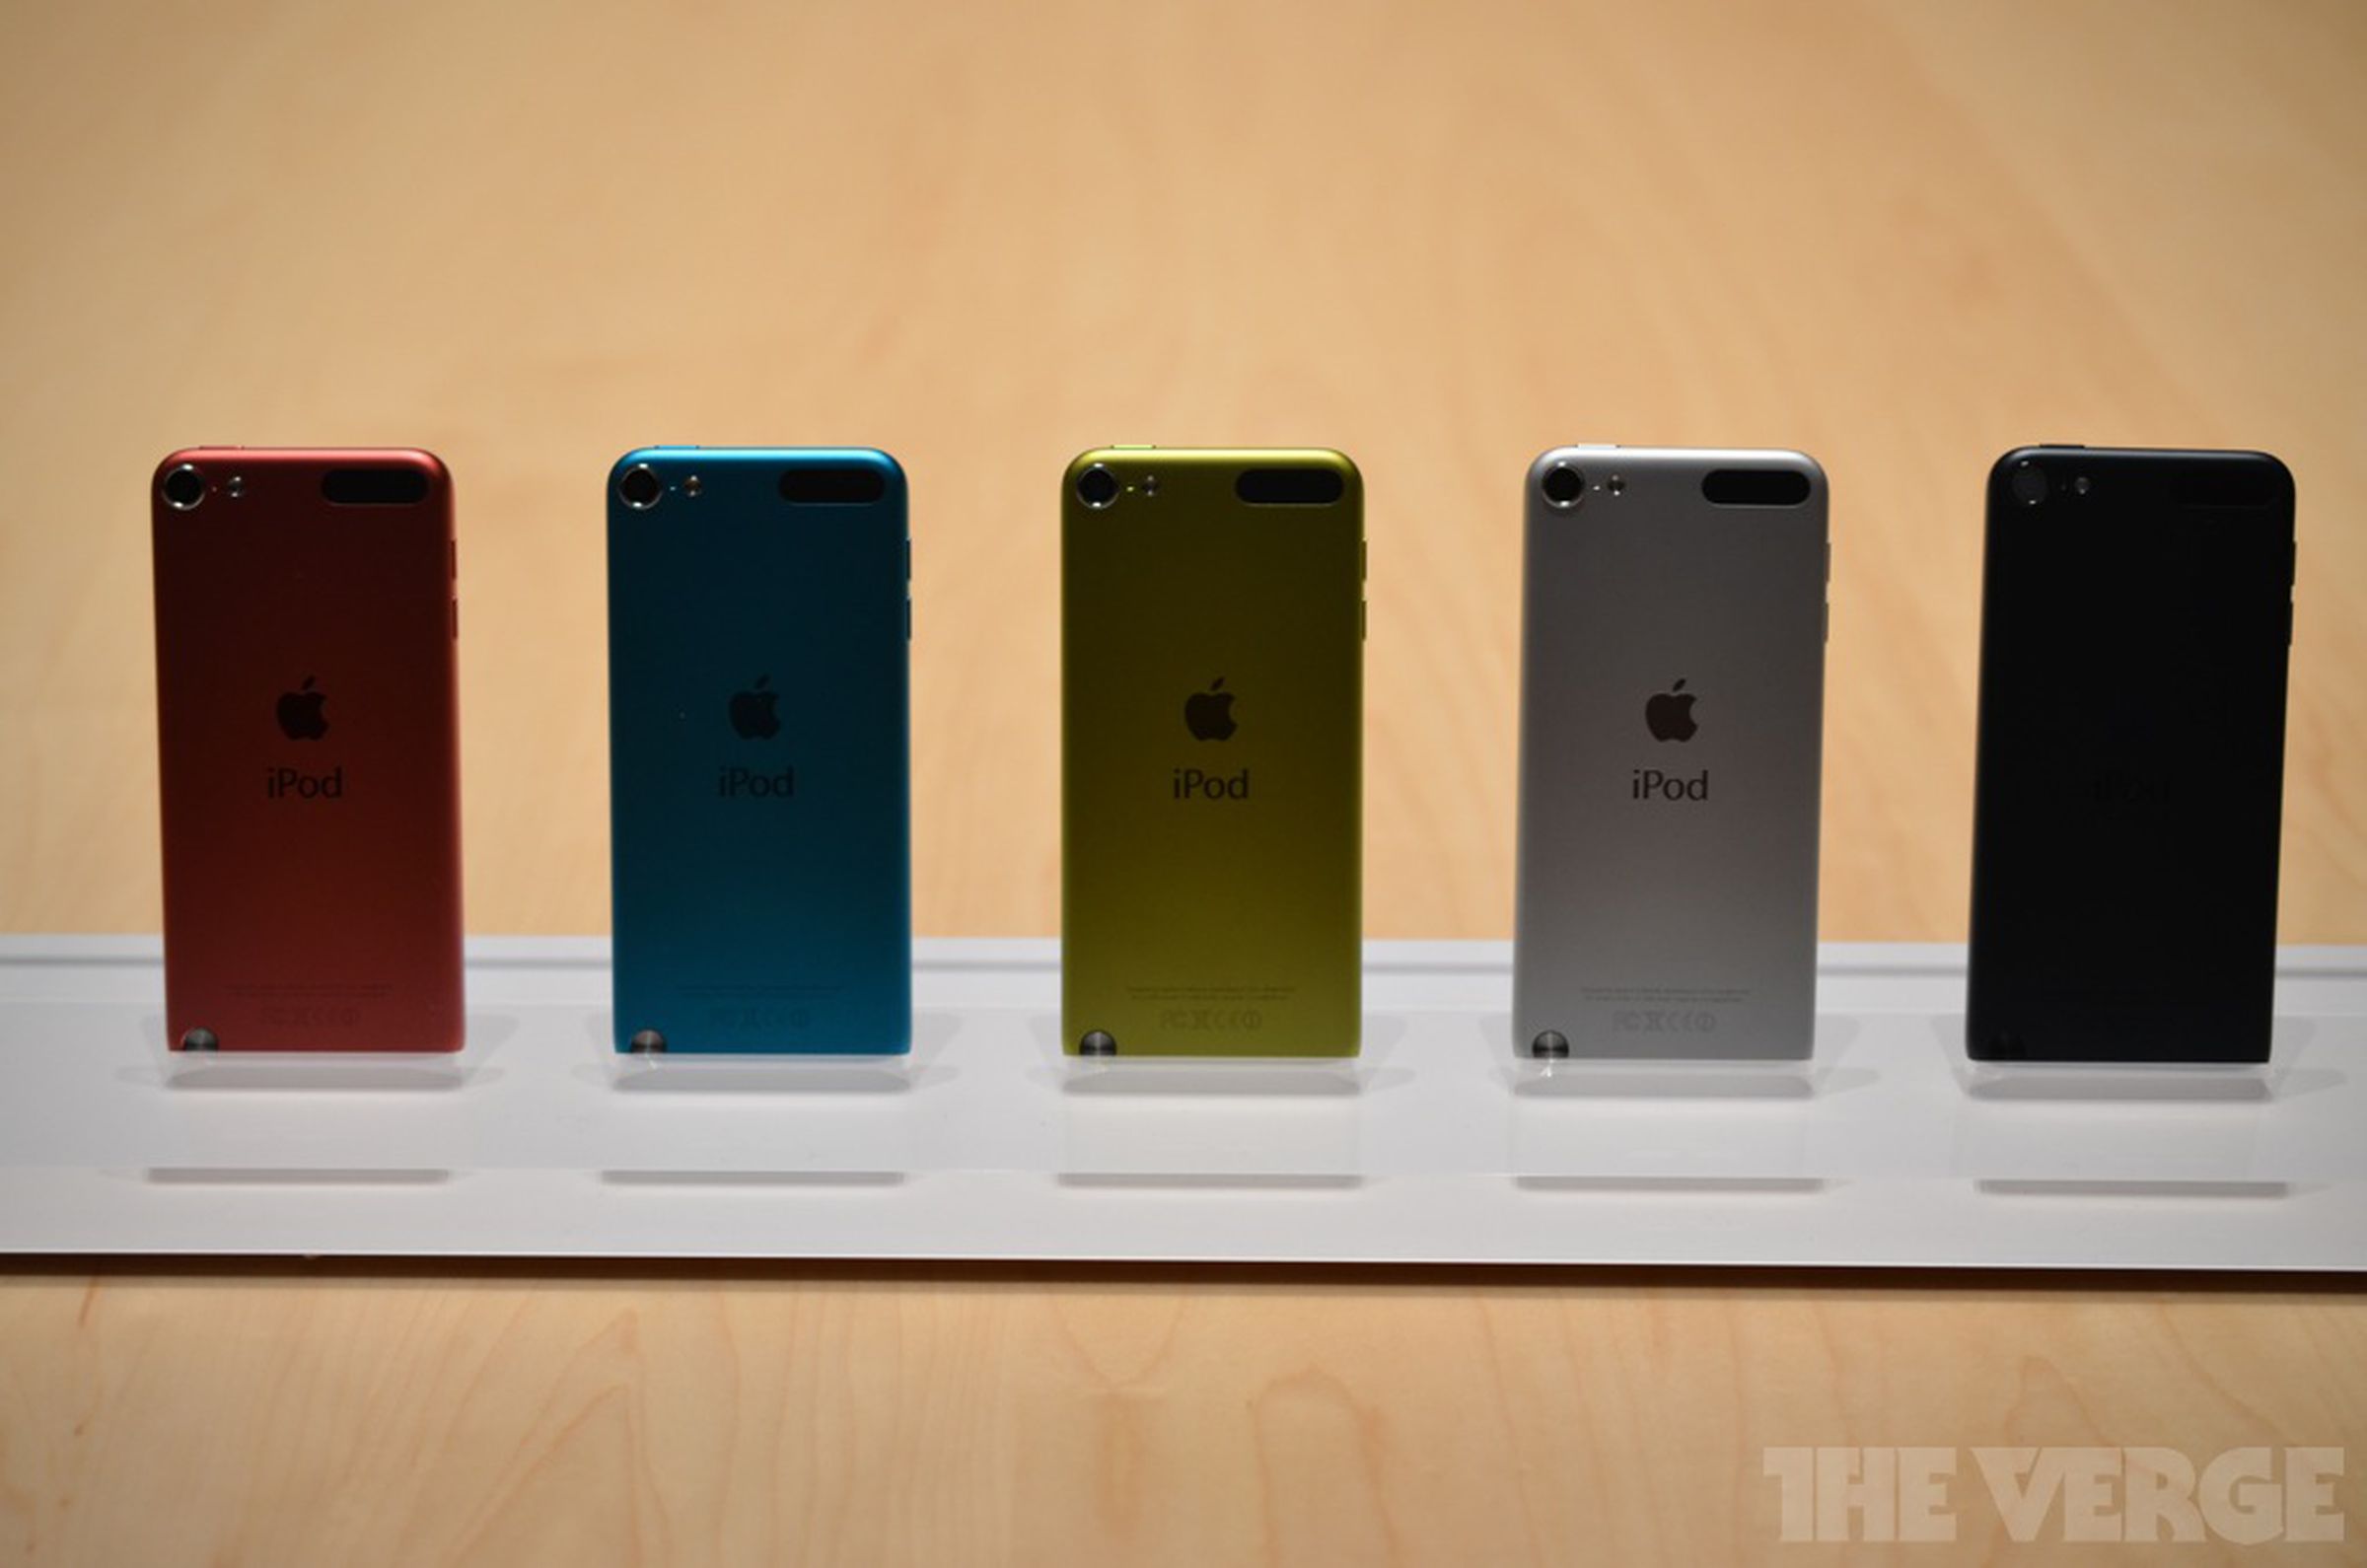 Apple's new iPod touch hands-on photo gallery